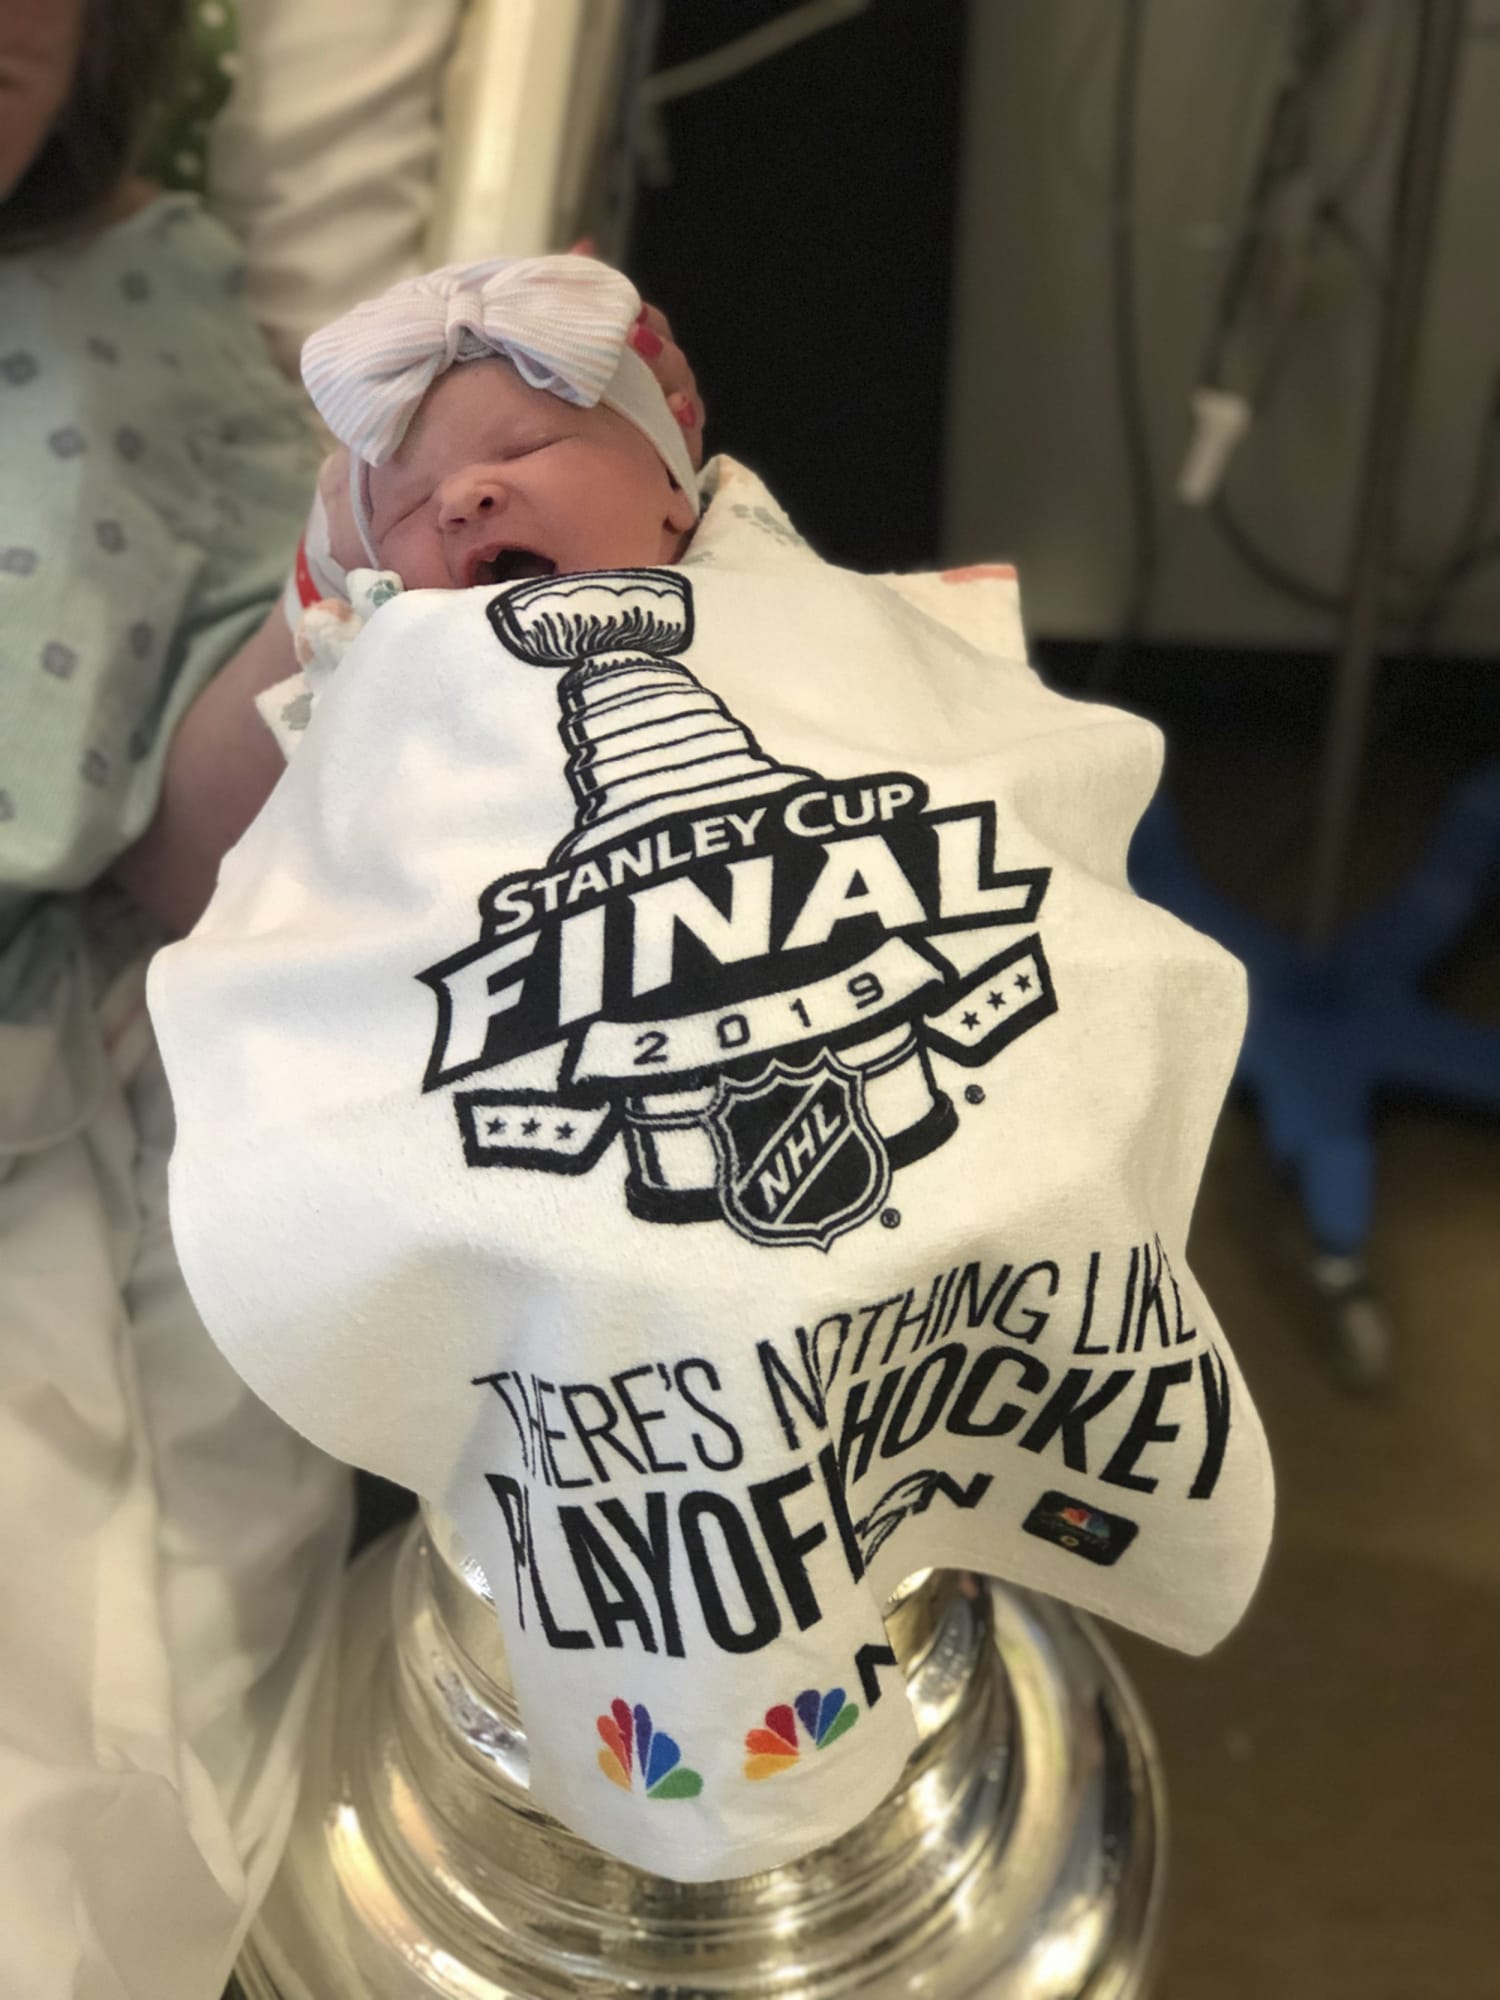  Baby Stanley Cup